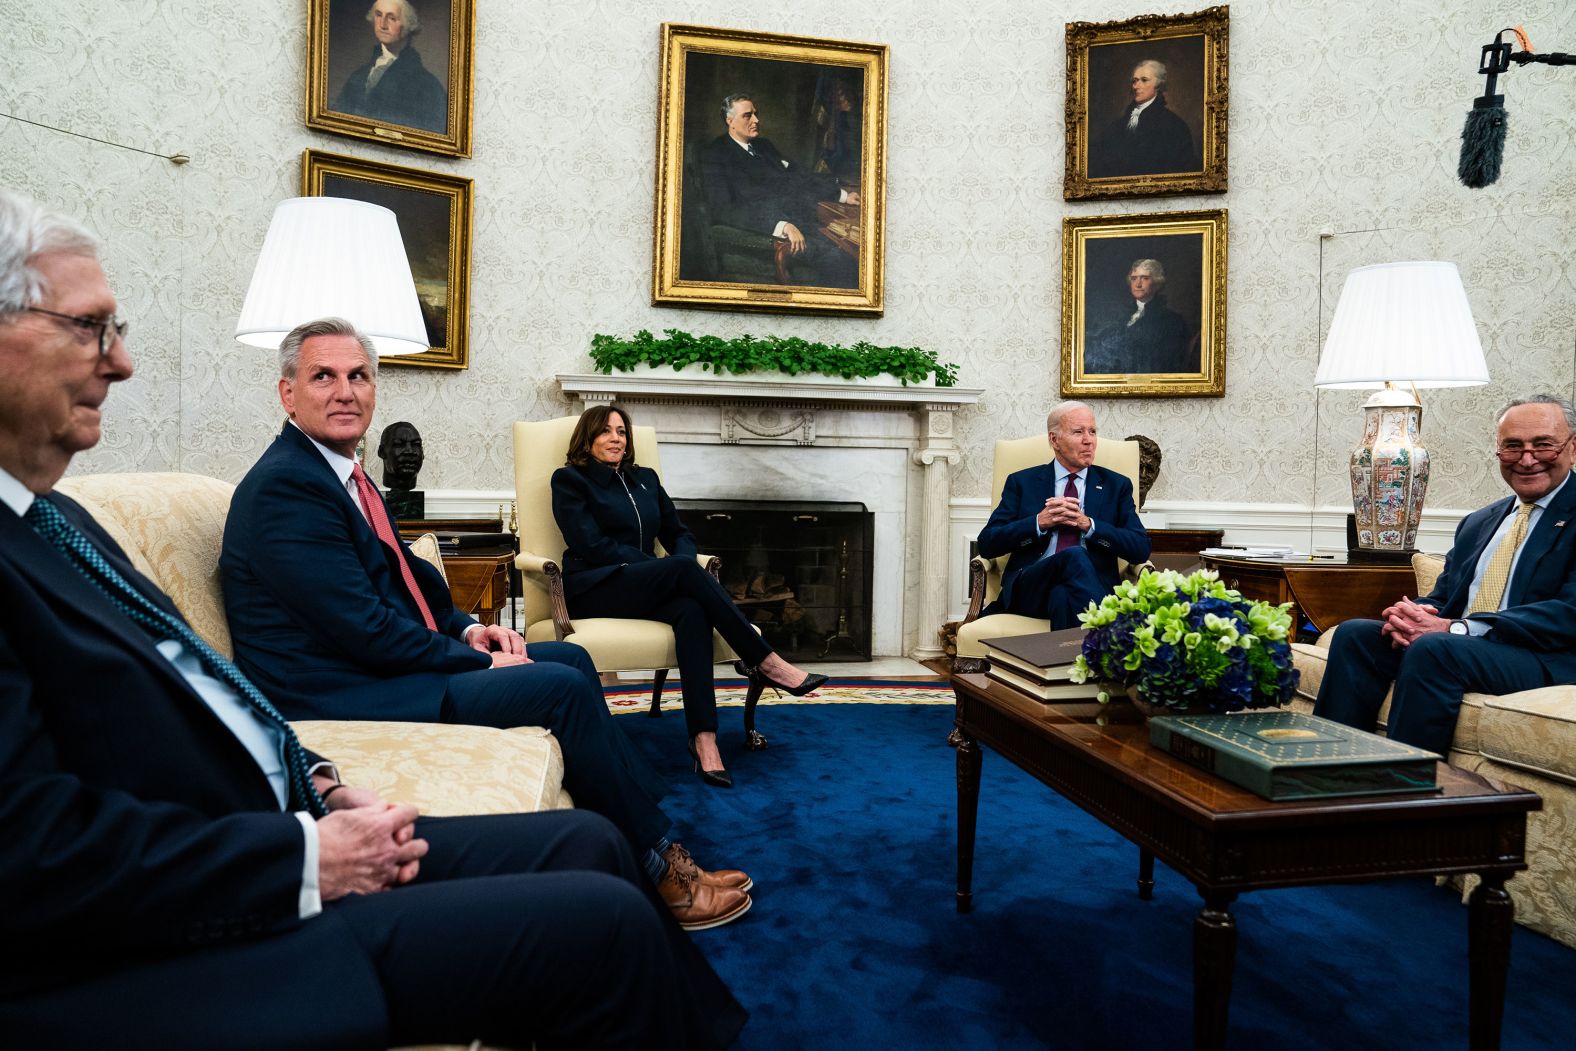 US President Joe Biden, second from right, and Vice President Kamala Harris <a href="index.php?page=&url=https%3A%2F%2Fwww.cnn.com%2F2023%2F05%2F16%2Fpolitics%2Fbiden-kevin-mccarthy-debt-default-negotiations%2Findex.html" target="_blank">meet with congressional leaders</a> in the White House Oval Office on Tuesday, May 16, to talk about a deal to raise the nation's borrowing limit and avoid a historic default. Joining Biden and Harris, from left, are Senate Minority Leader Mitch McConnell, House Speaker Kevin McCarthy and Senate Majority Leader Chuck Schumer.